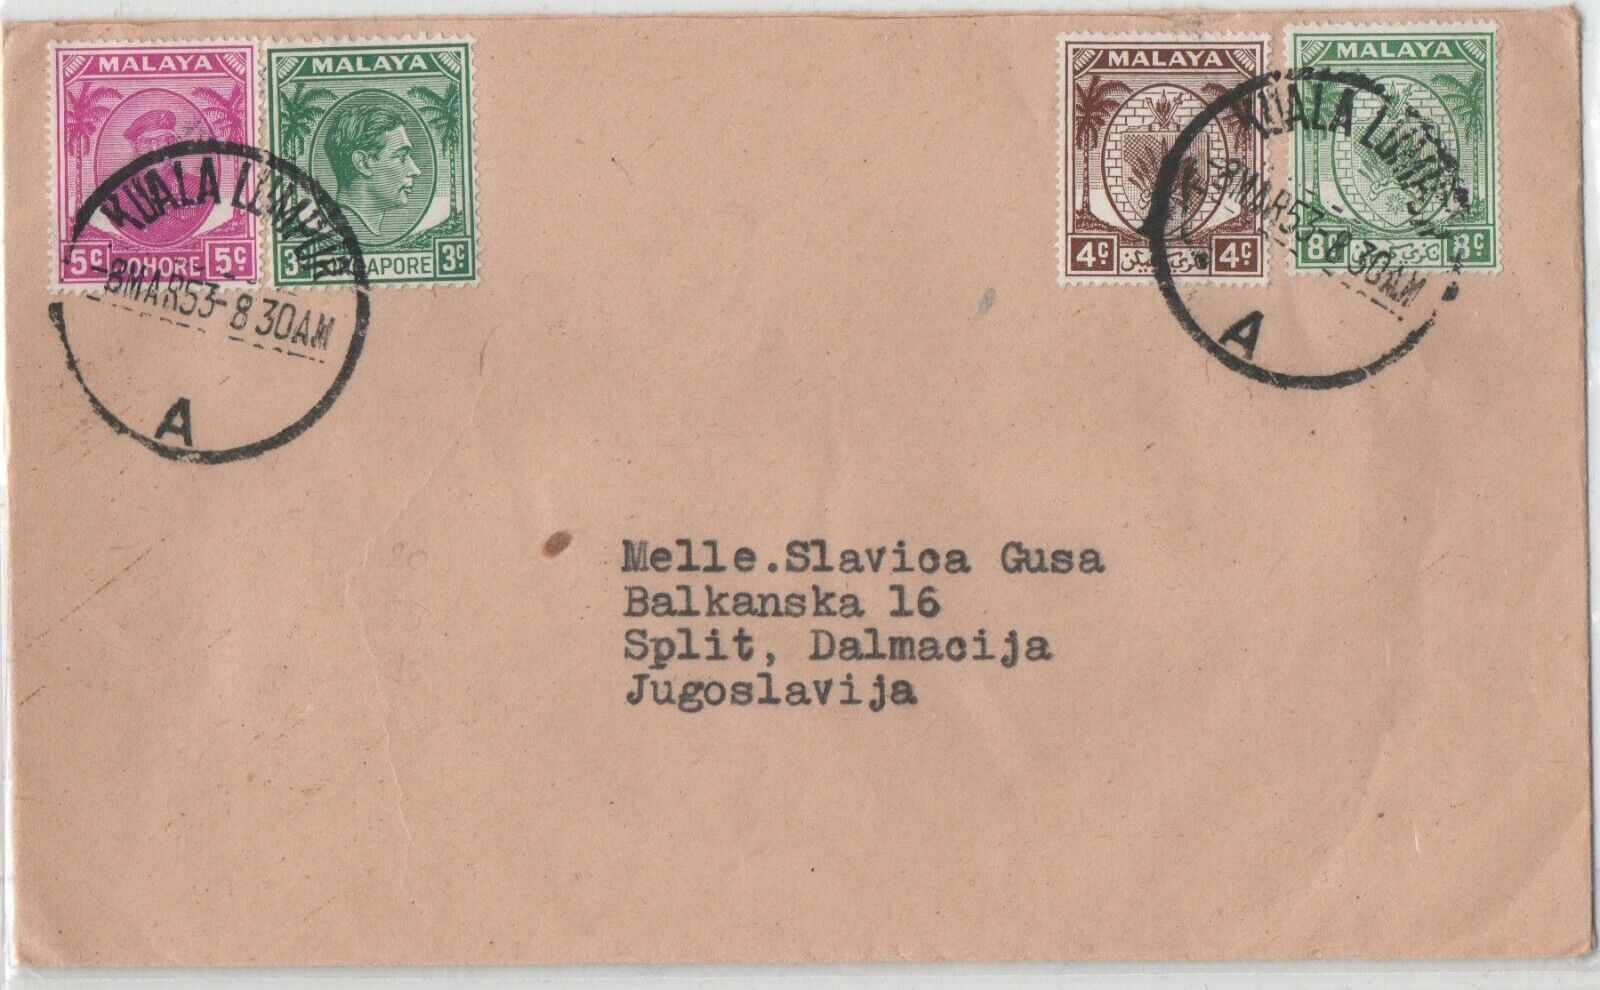 MALAYA 1953 cover with 4 different stamps, KUALA LUMPUR to SPLIT